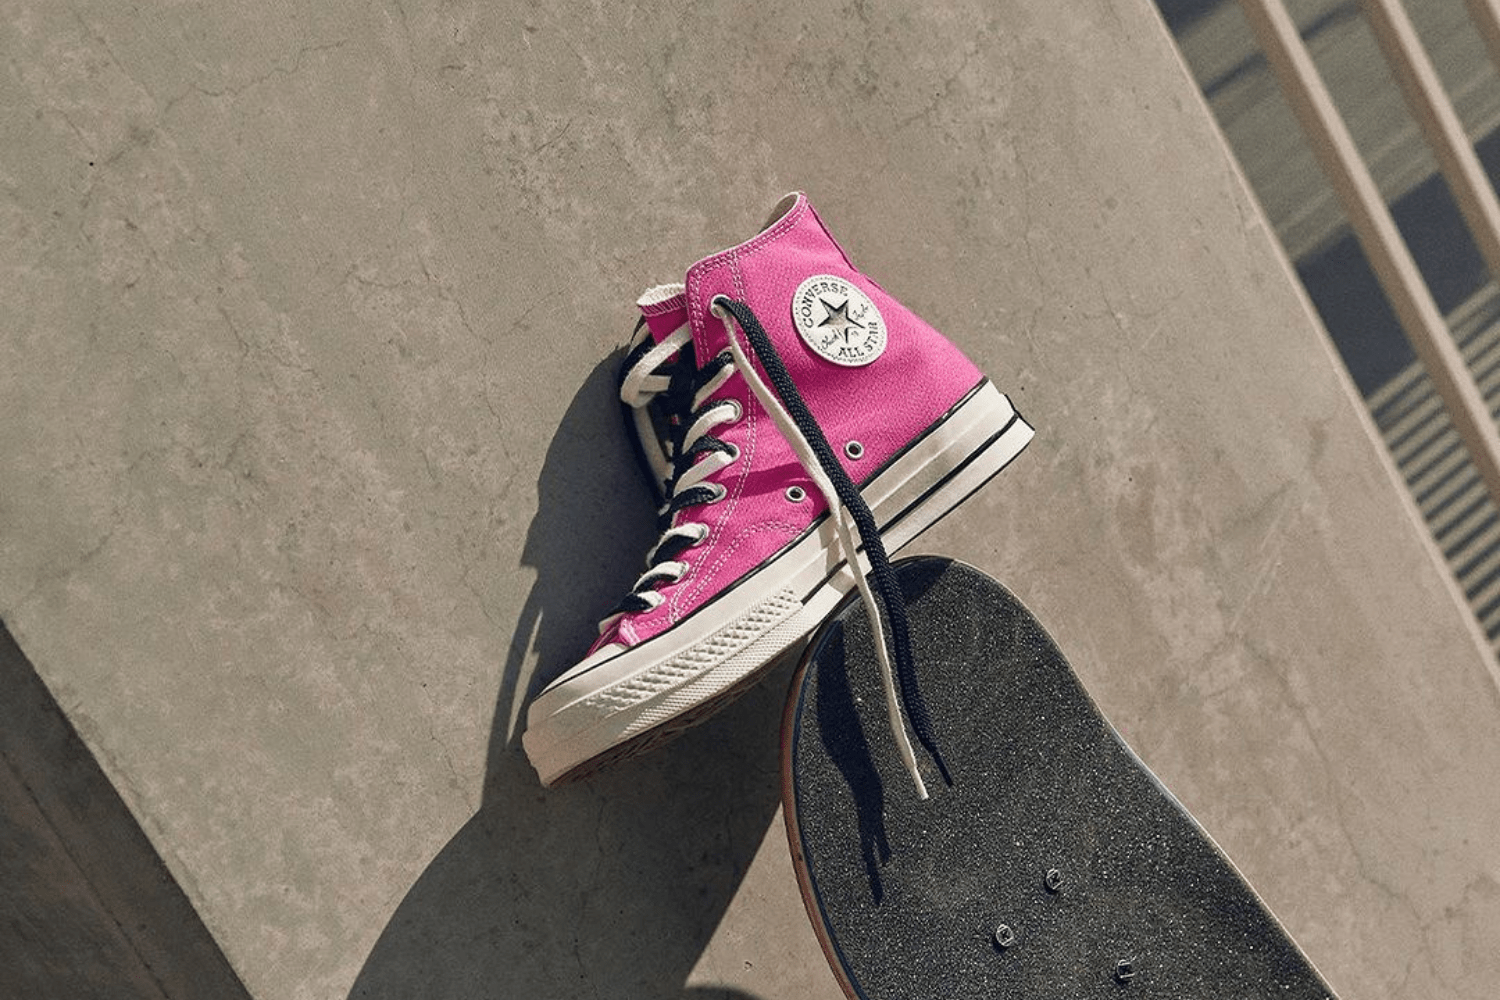 Converse by You offers more comfort for wider sizes